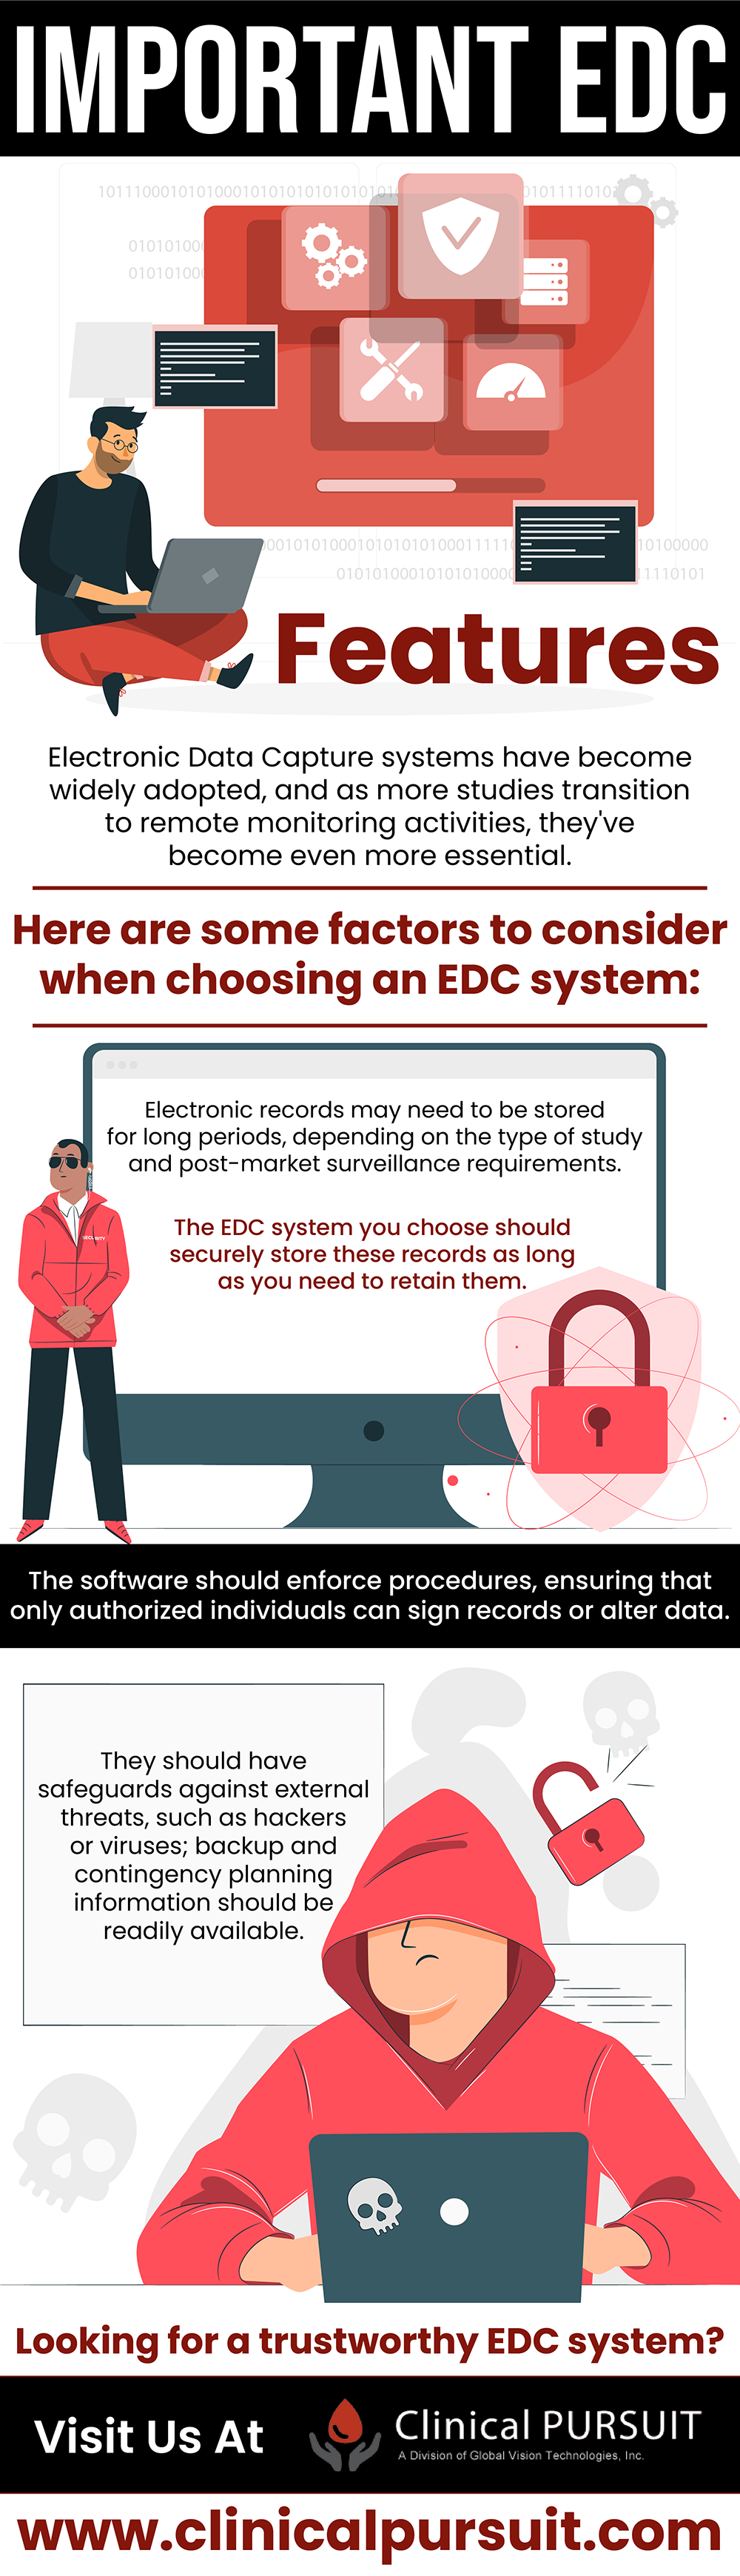 Infographic on Important EDC Features